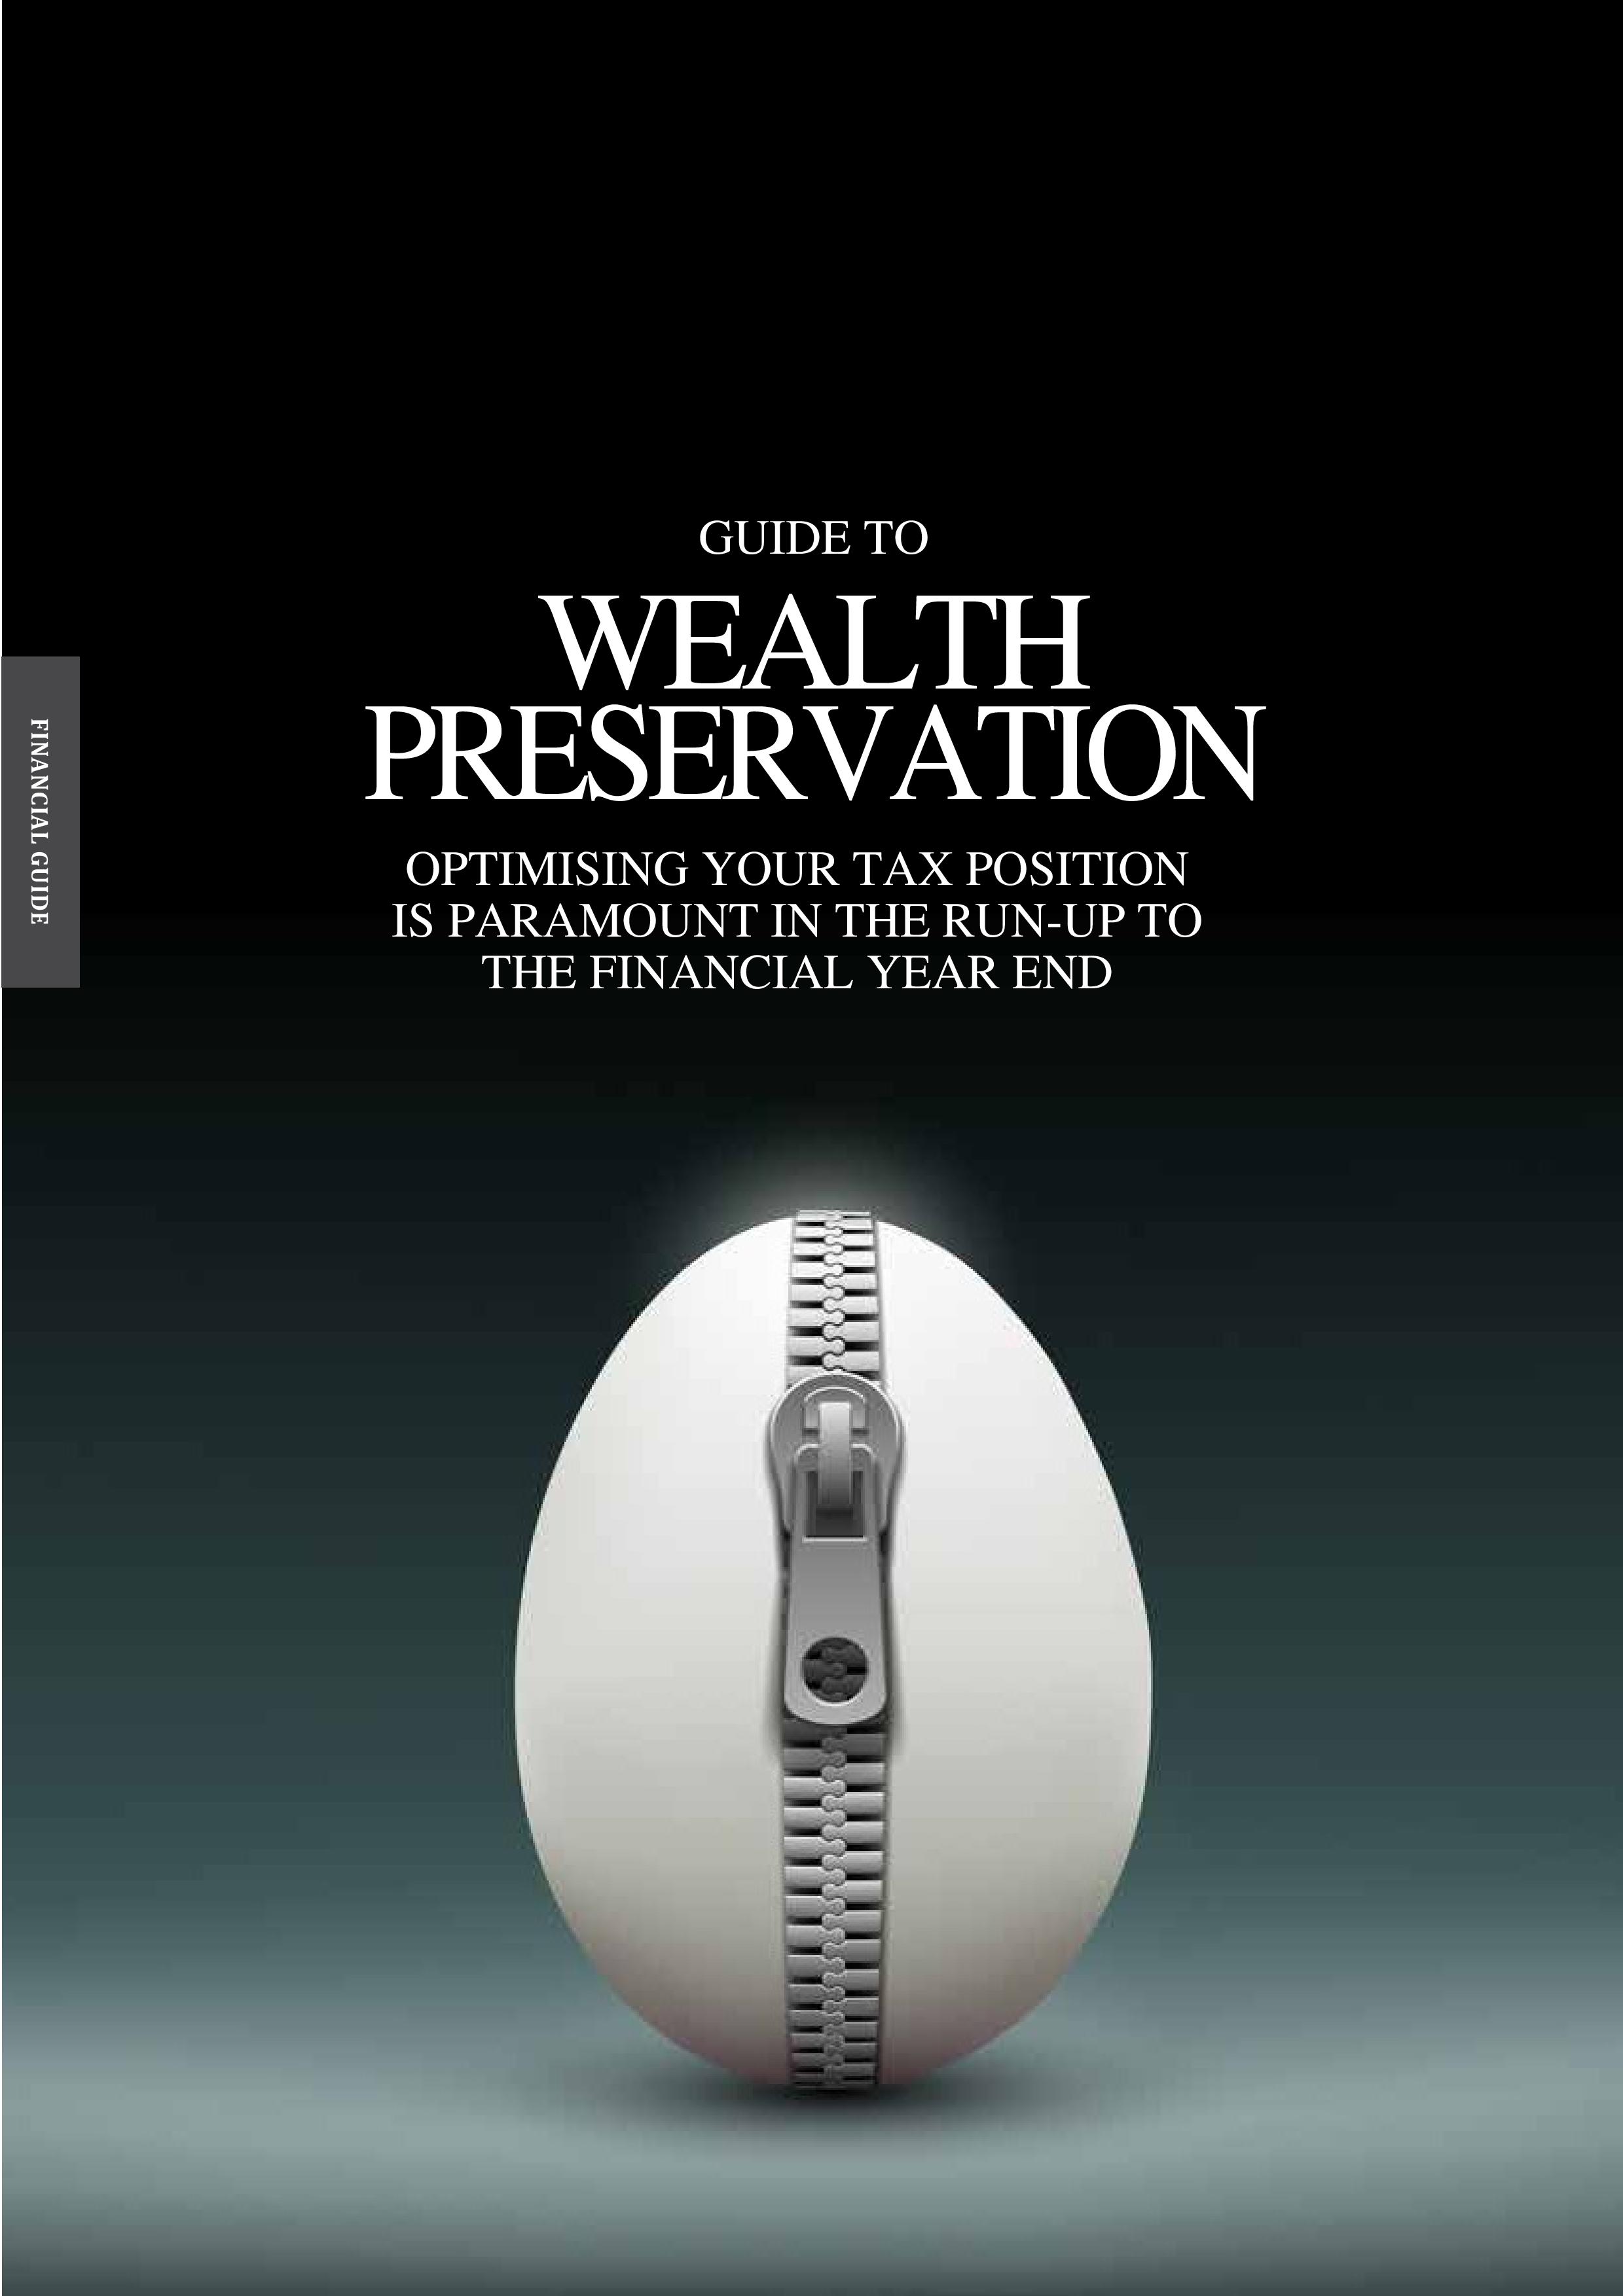 Guide to wealth preservation